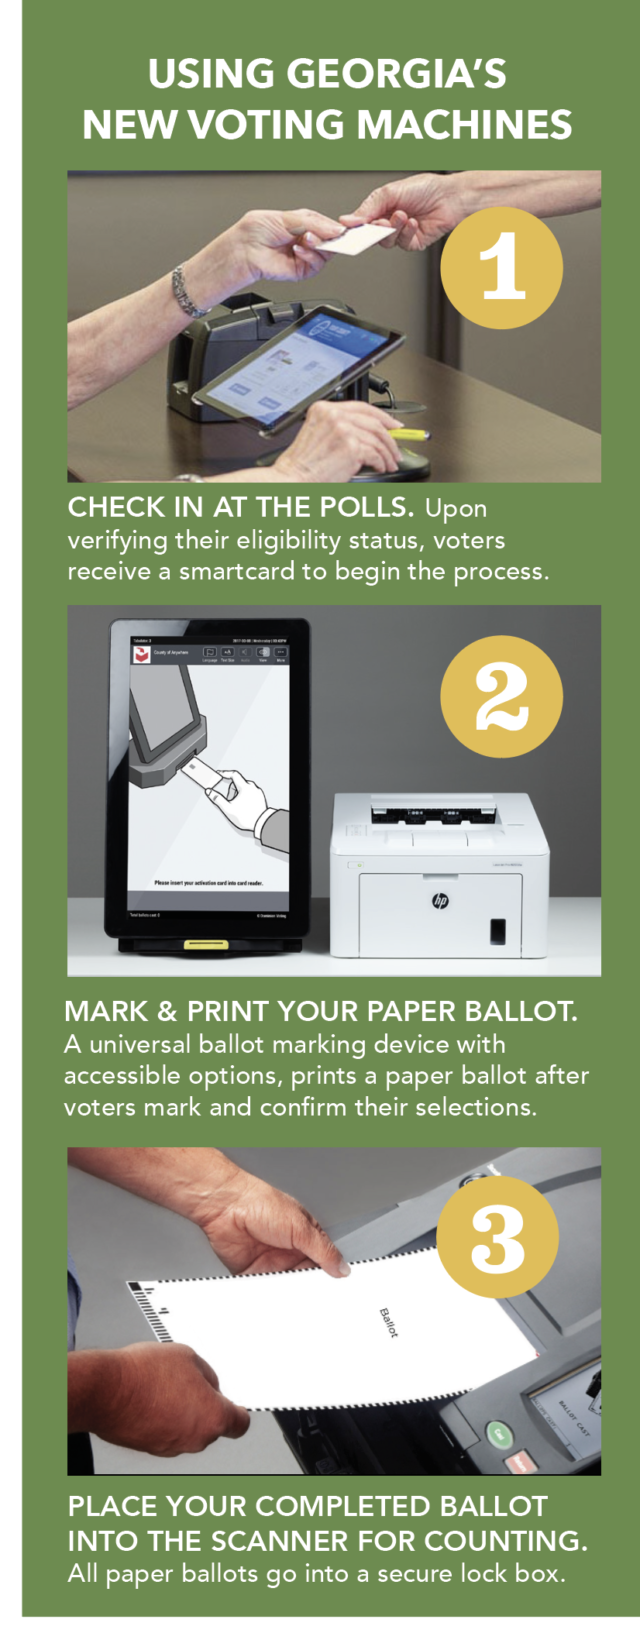 Using Georgia's New Voting Machines: 1) Check in at the polls. Upon verifying their eligibility status, voters receive a smartcard to begin the process. 2) Mark and print your paper ballot. A universal ballot marking device with accessible options, prints a paper ballot after voters mark and confirm their selections. 3) Place your completed ballot into scanner for counting. All paper ballots go into a secure lock box. 